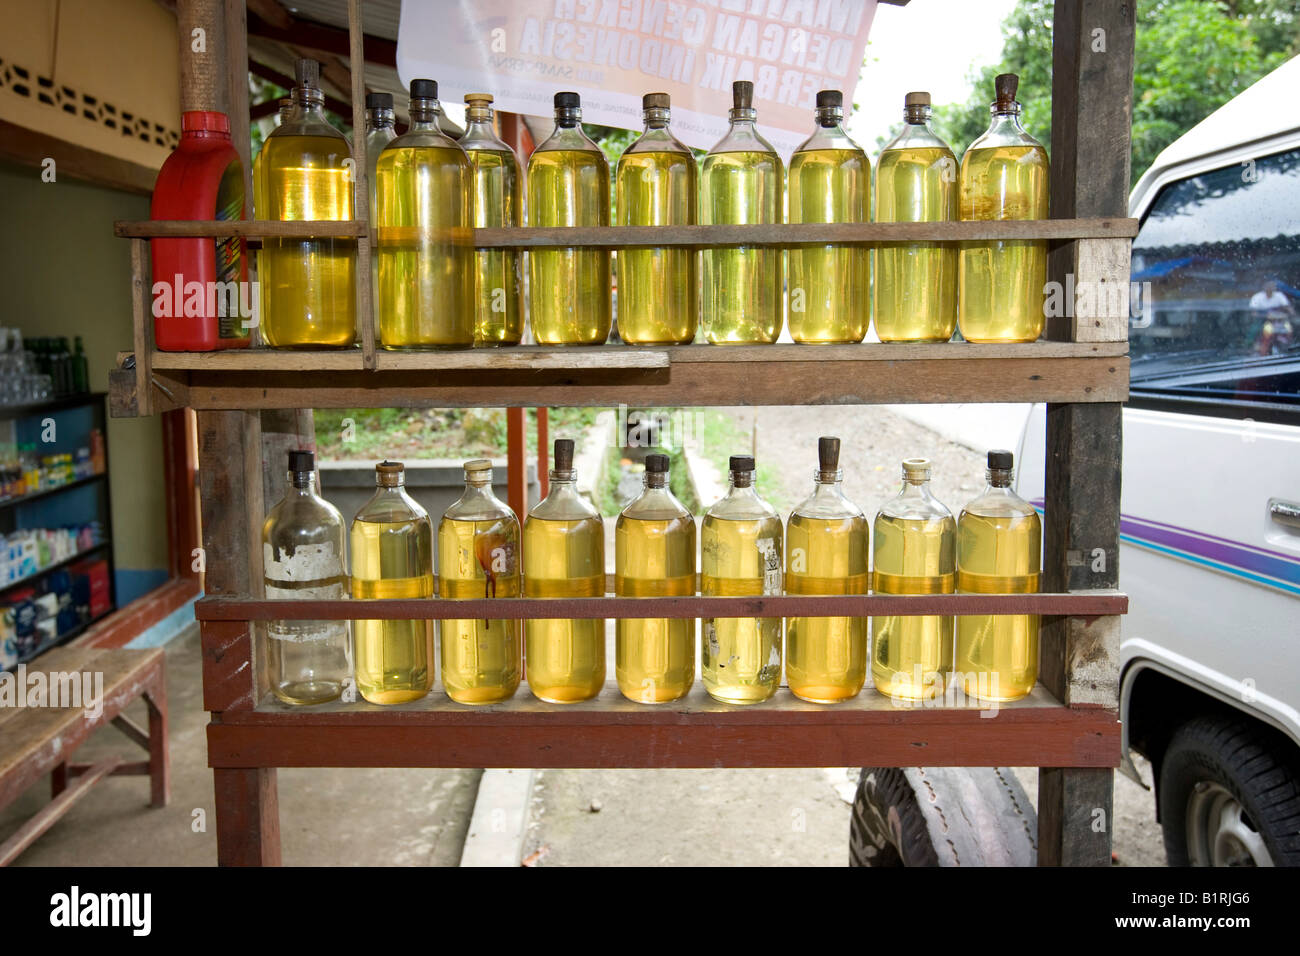 Typical petrol station on the streets of Asia, petrol is stored in glass bottles from which it is sold and poured into the petr Stock Photo